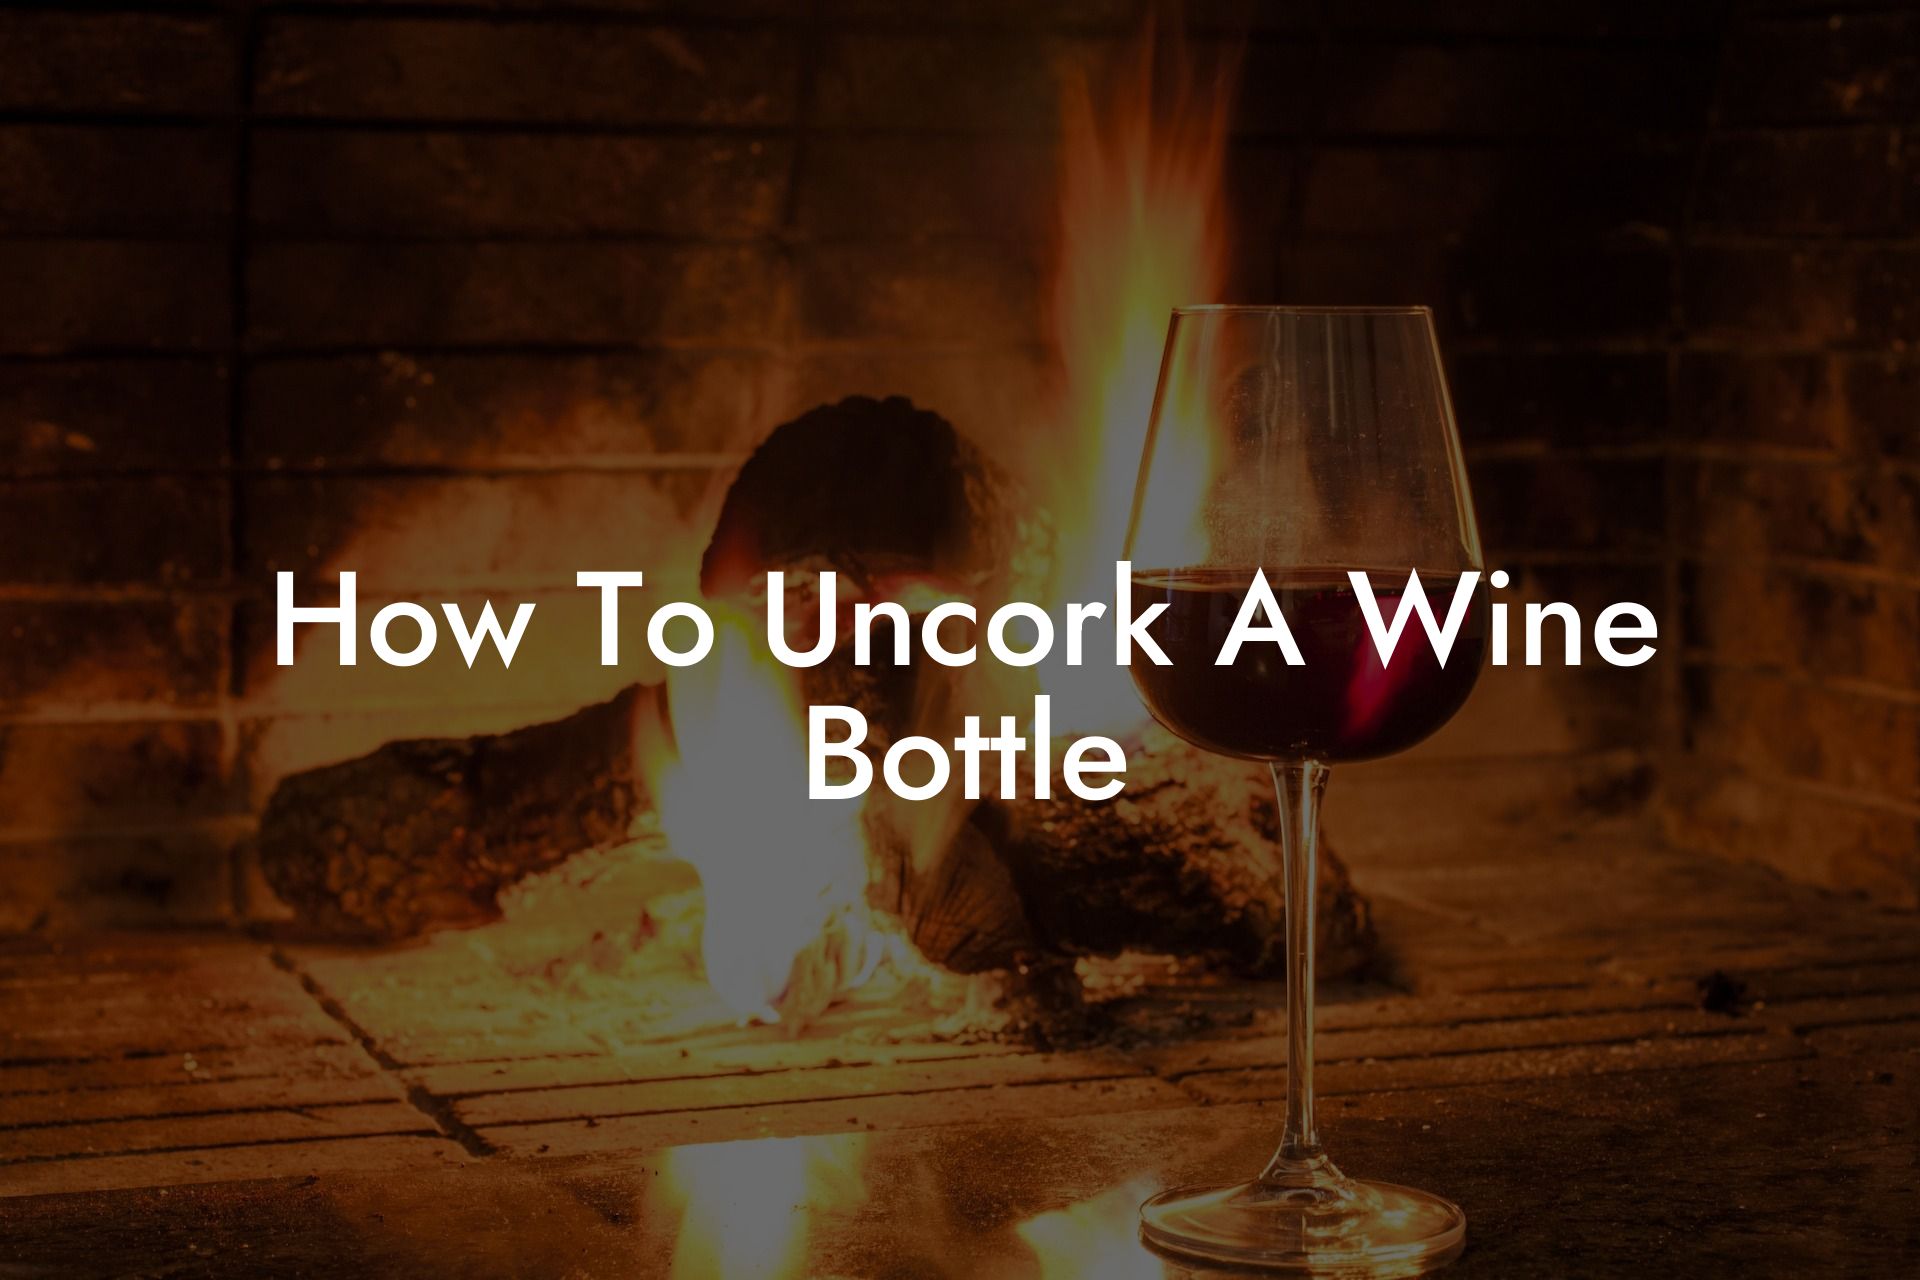 How To Uncork A Wine Bottle